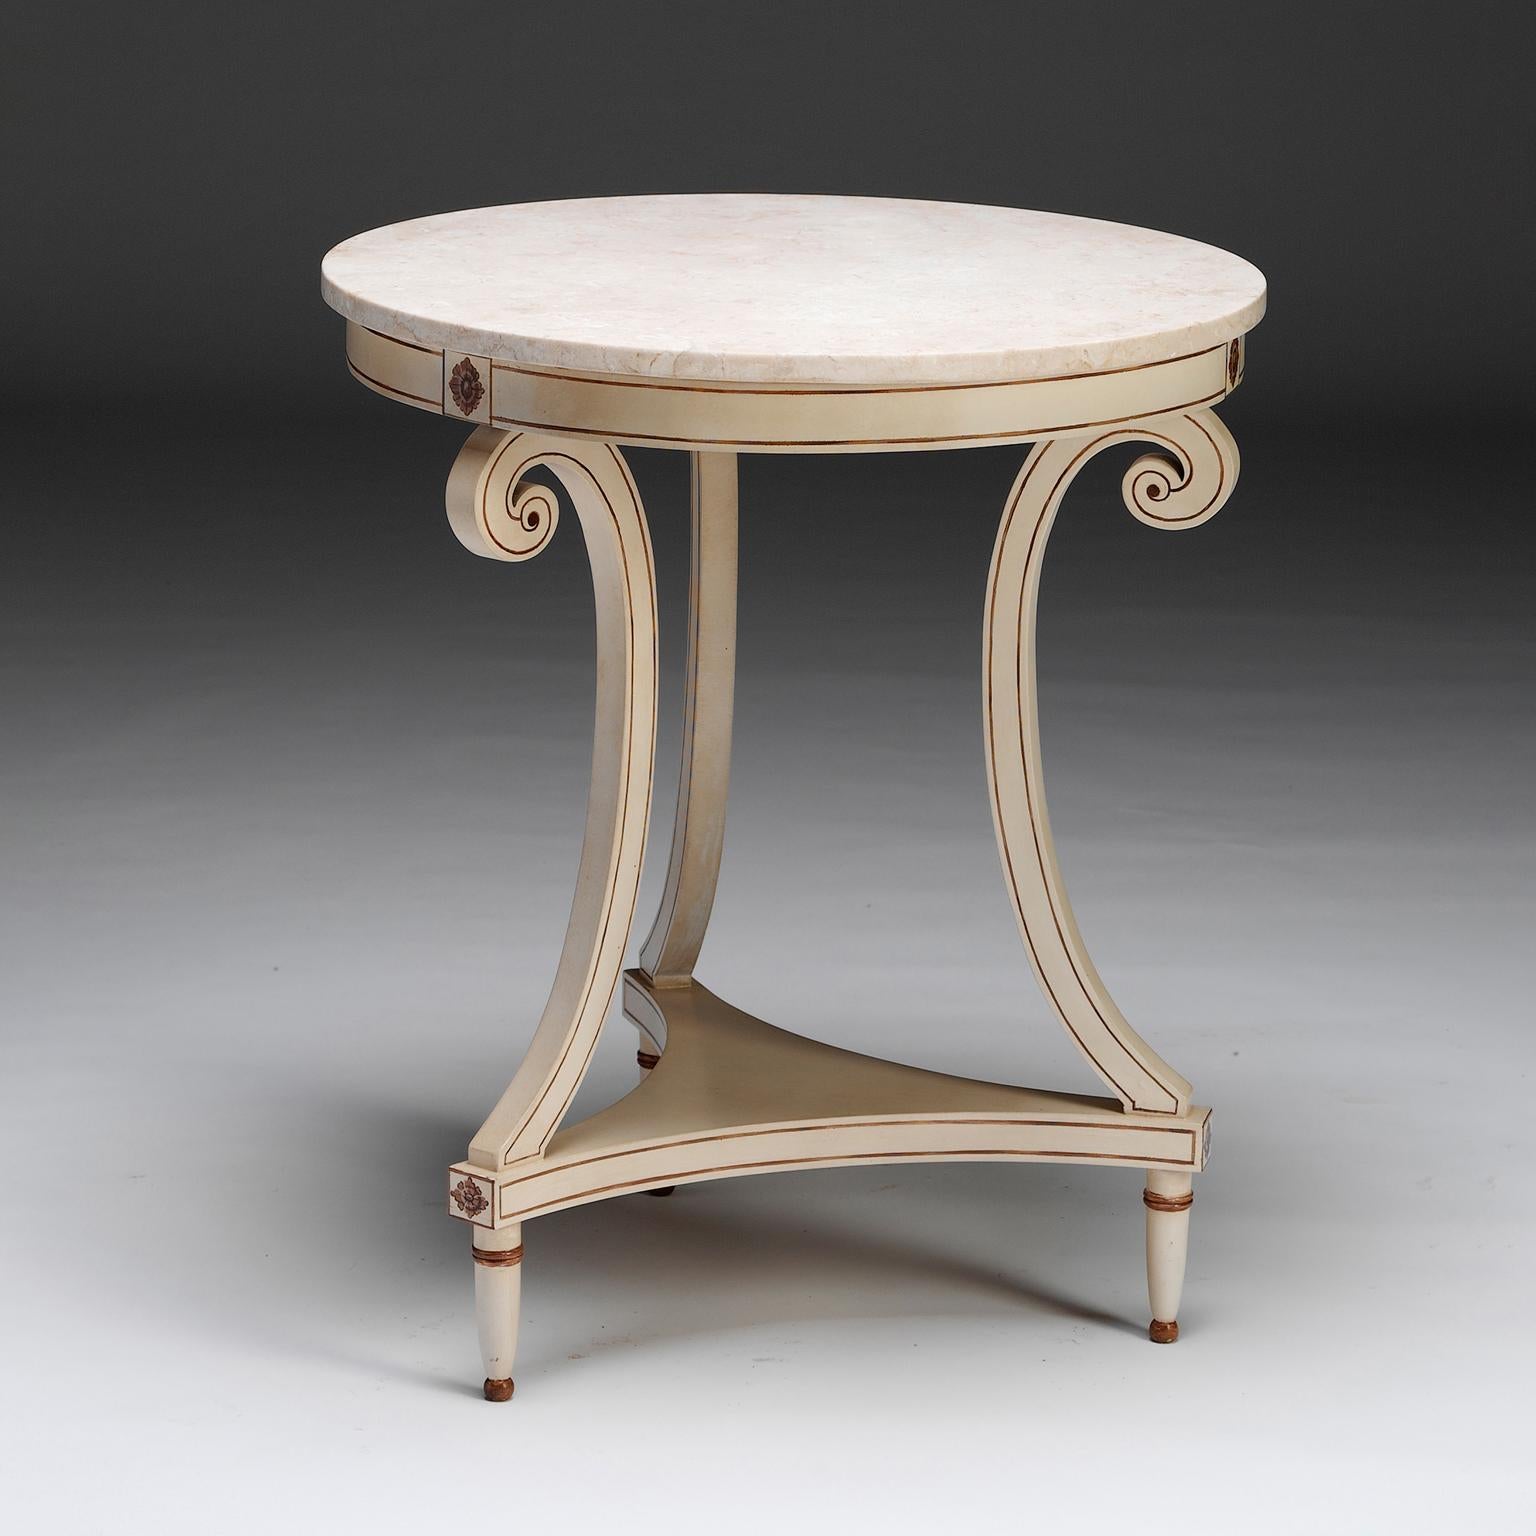 A Regency design circular marble topped painted and decorated centre/lamp table with elongated turned feet.

Bespoke sizing, design adaptations and finishing available.

We are currently working to a 30-36 week lead time.